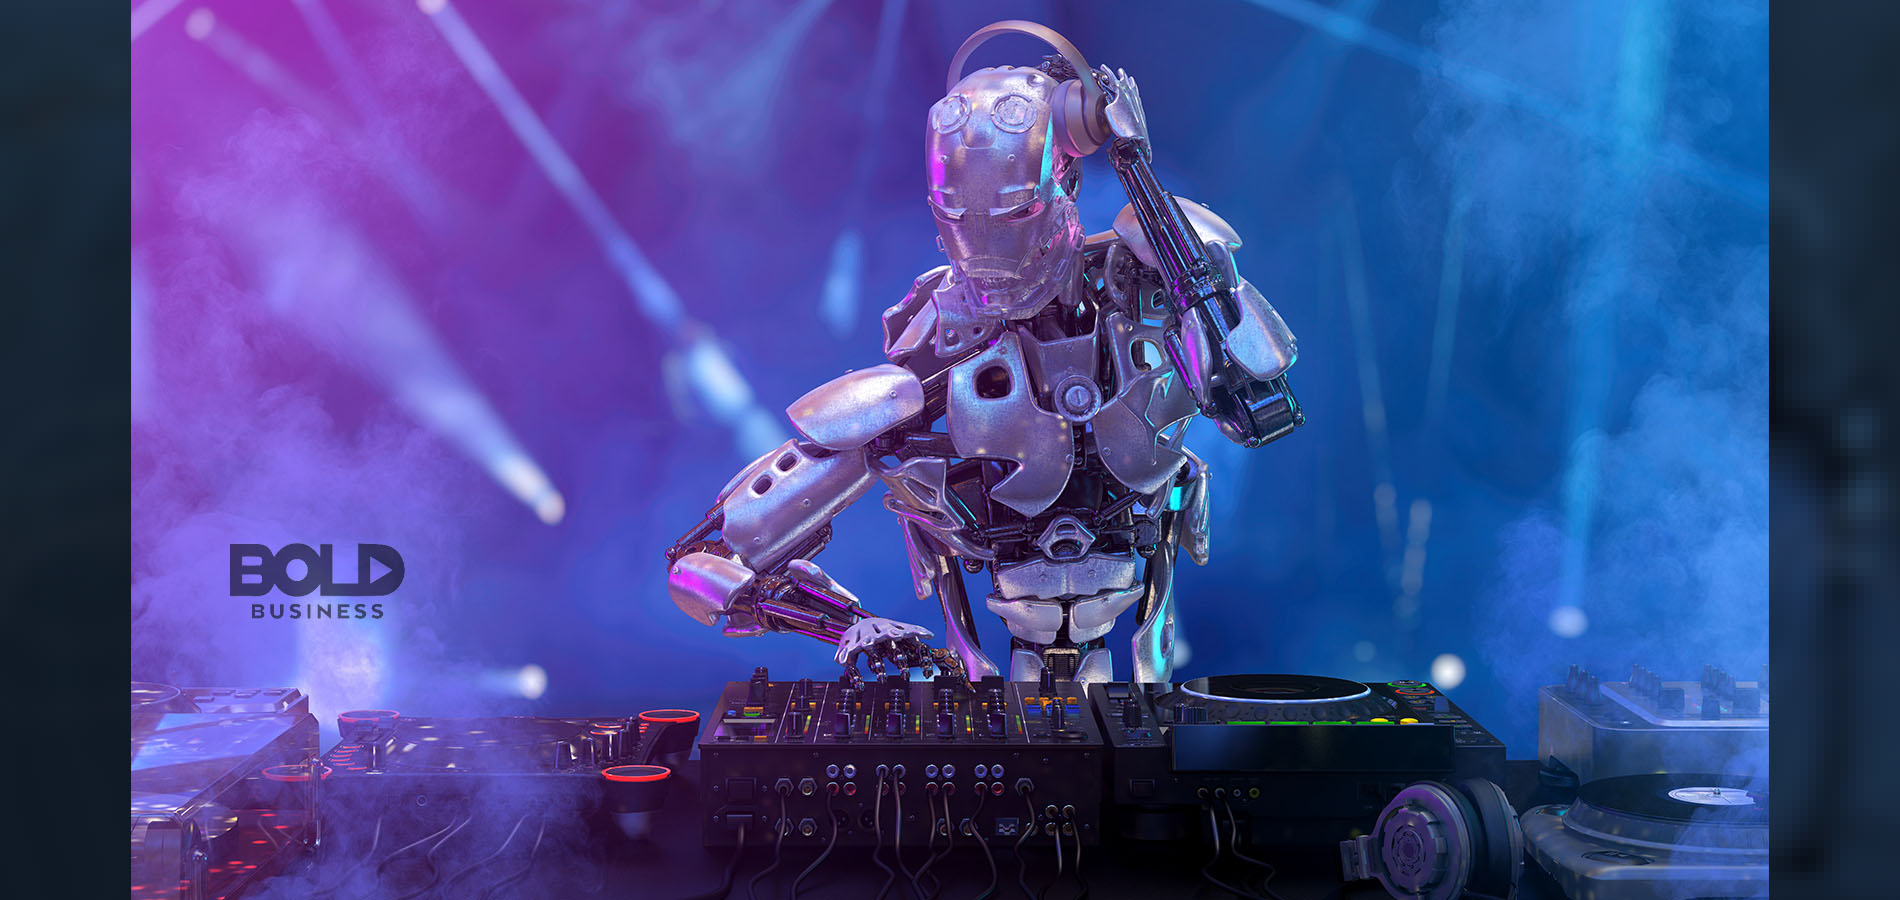 A robot doing AI in music production